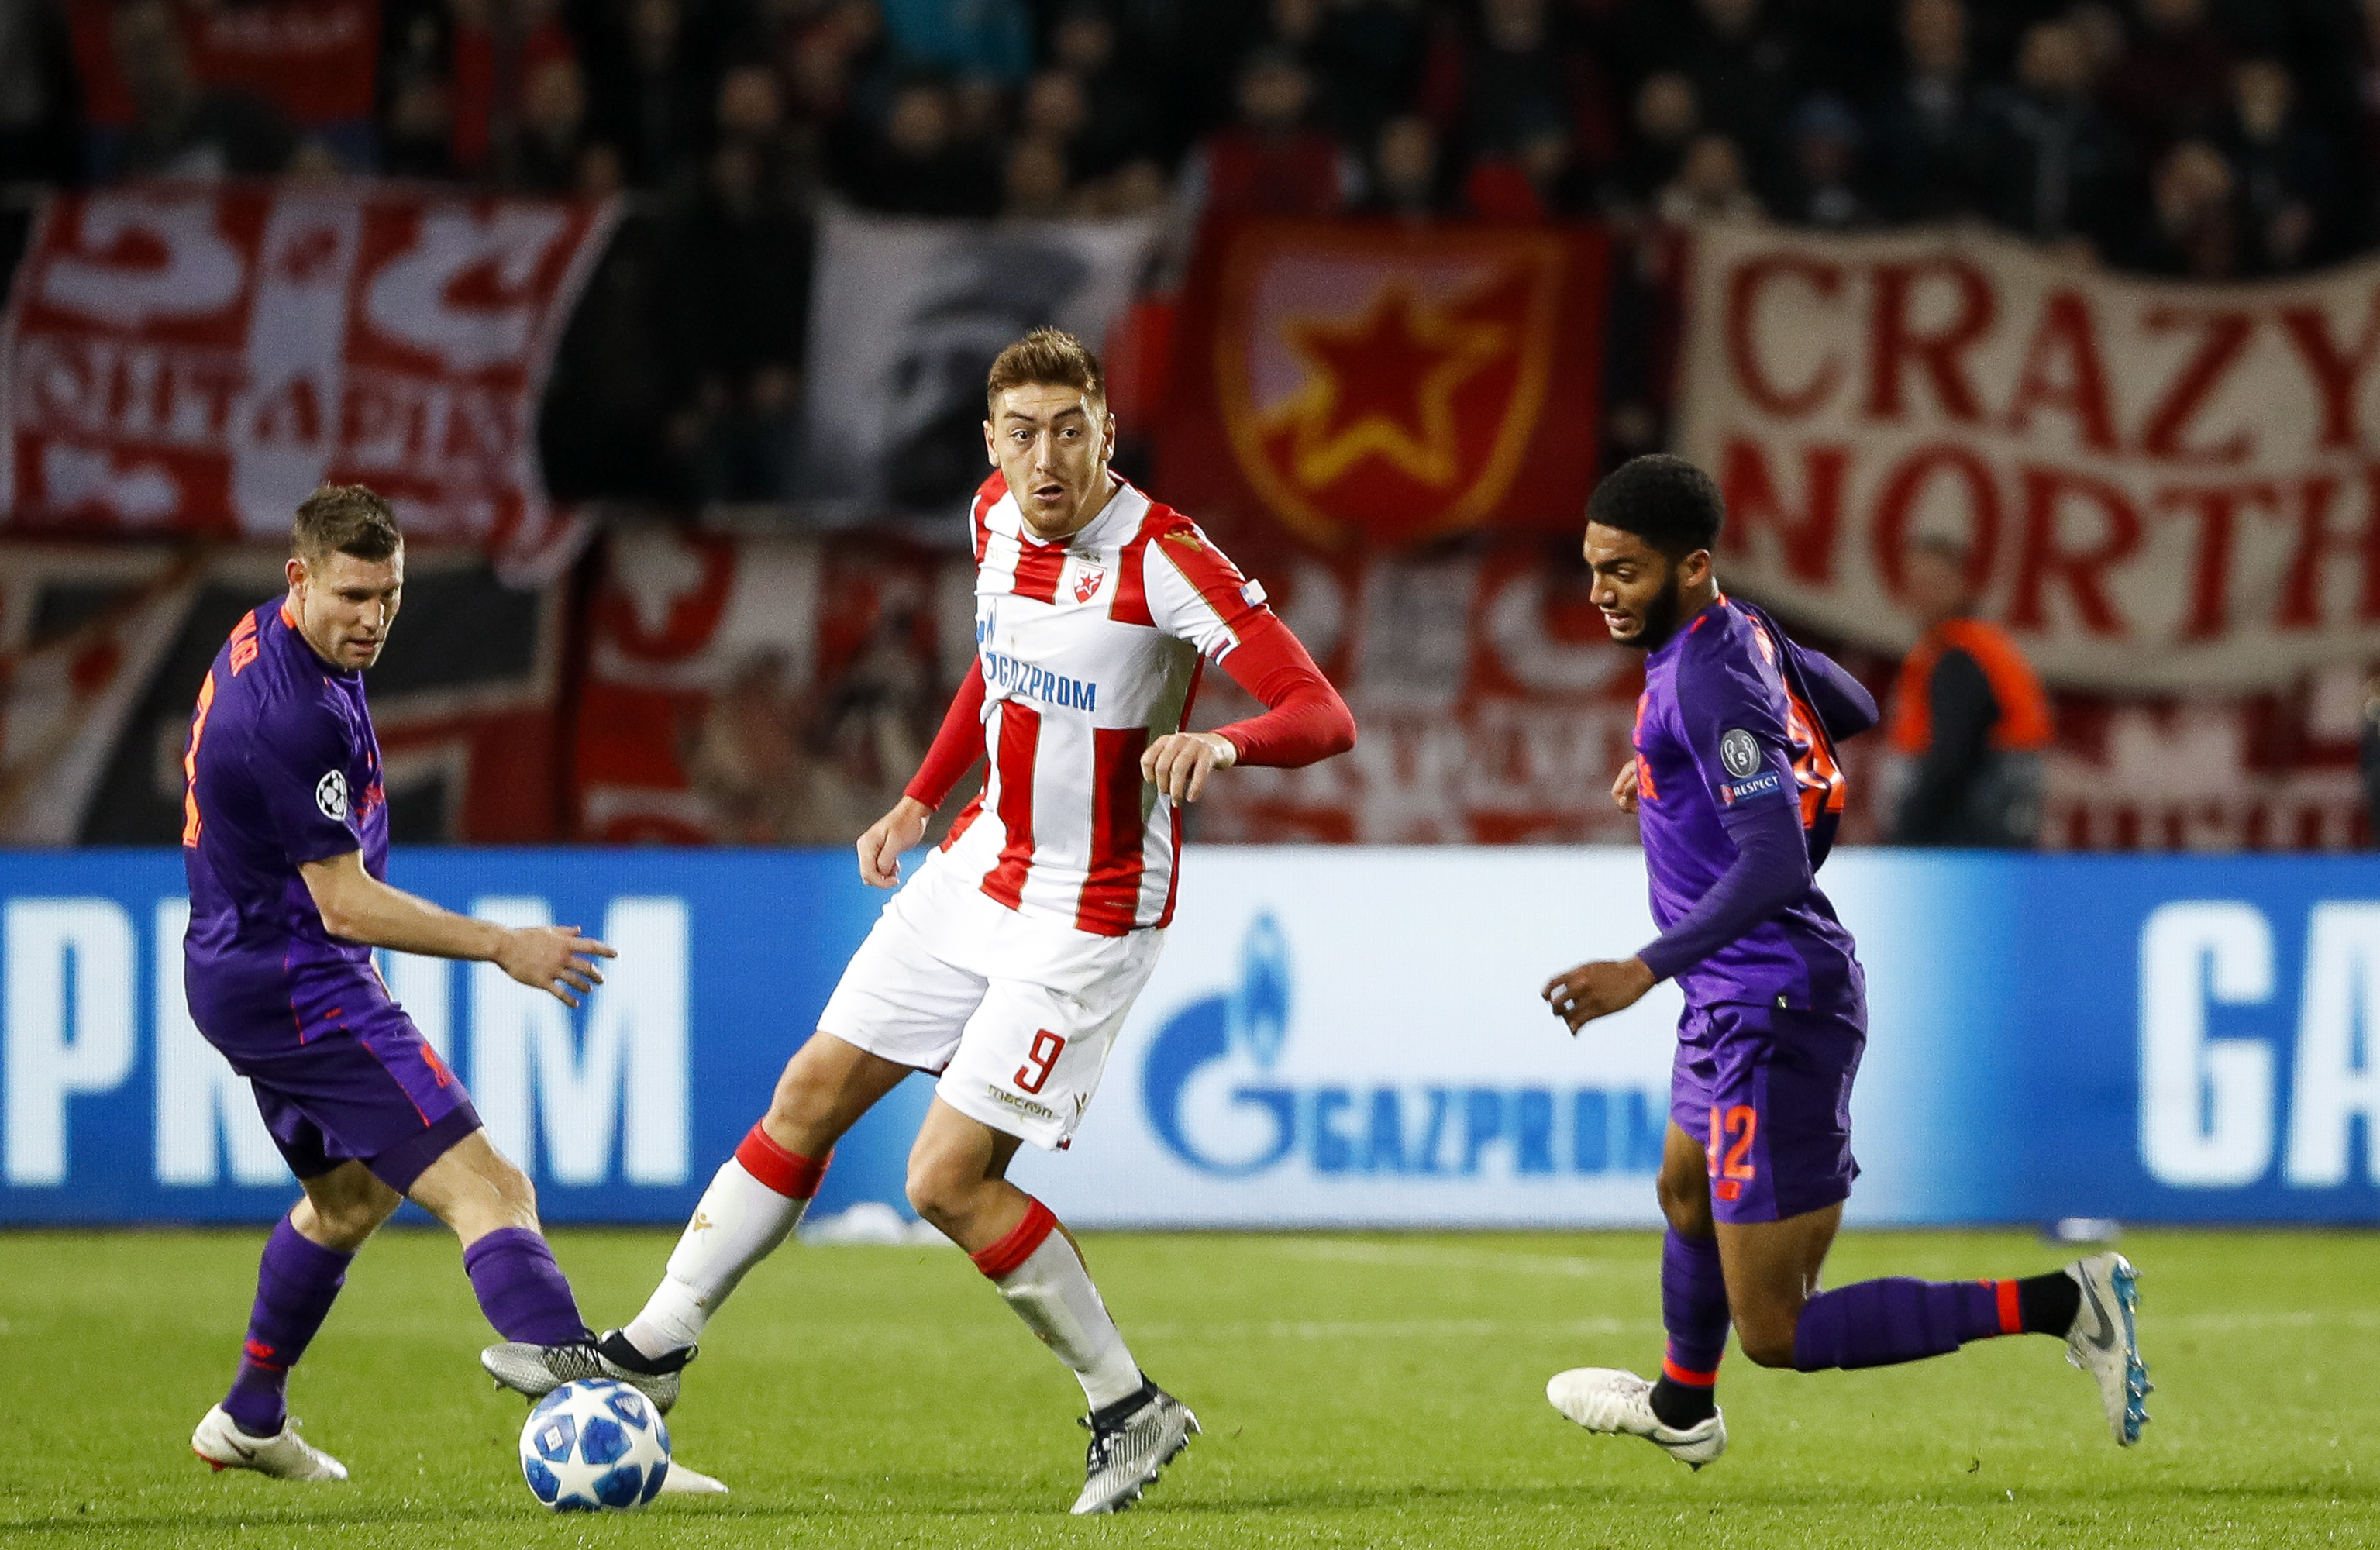 BELGRADE, SERBIA - NOVEMBER 06: Milan Pavkov (C) of Crvena Zvezda in action against Joe Gomez (R) and James Milner (L) of Liverpool during the Group C match of the UEFA Champions League between Red Star Belgrade and Liverpool at Rajko Mitic Stadium on November 06, 2018 in Belgrade, Serbia. (Photo by Srdjan Stevanovic/Getty Images)